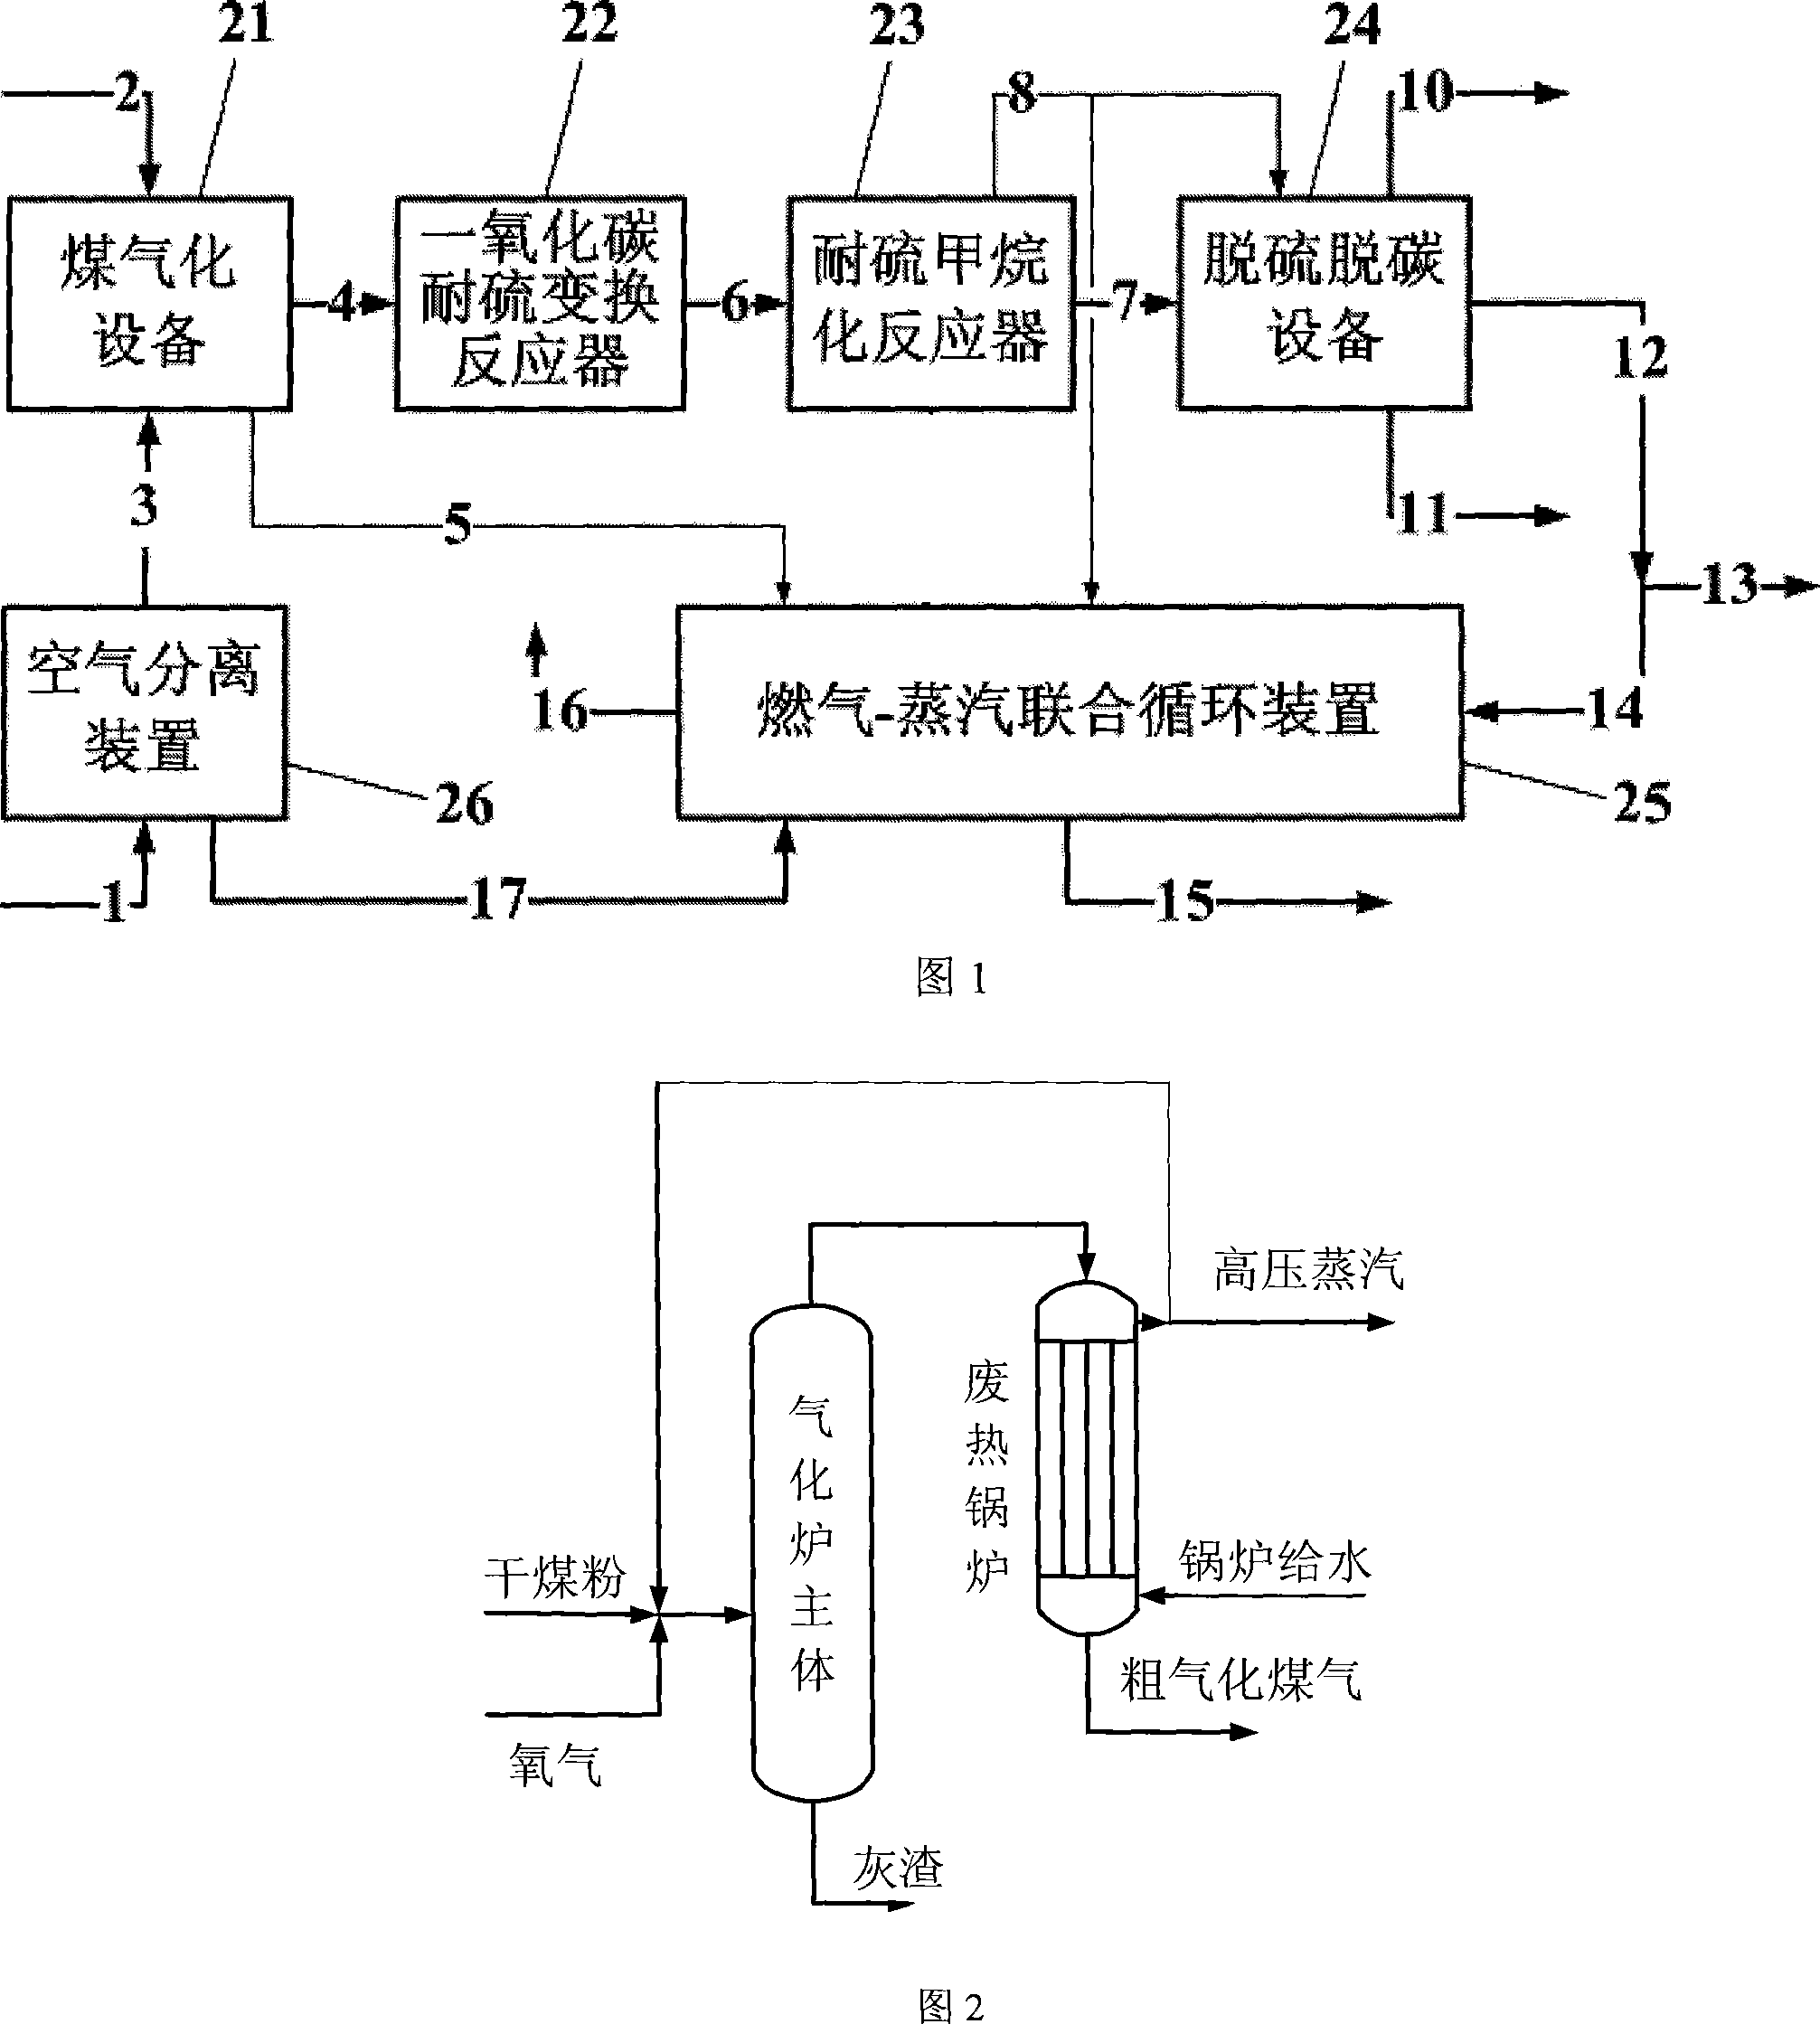 Gas-steam combined cycle system and technique based on coal gasification and methanation